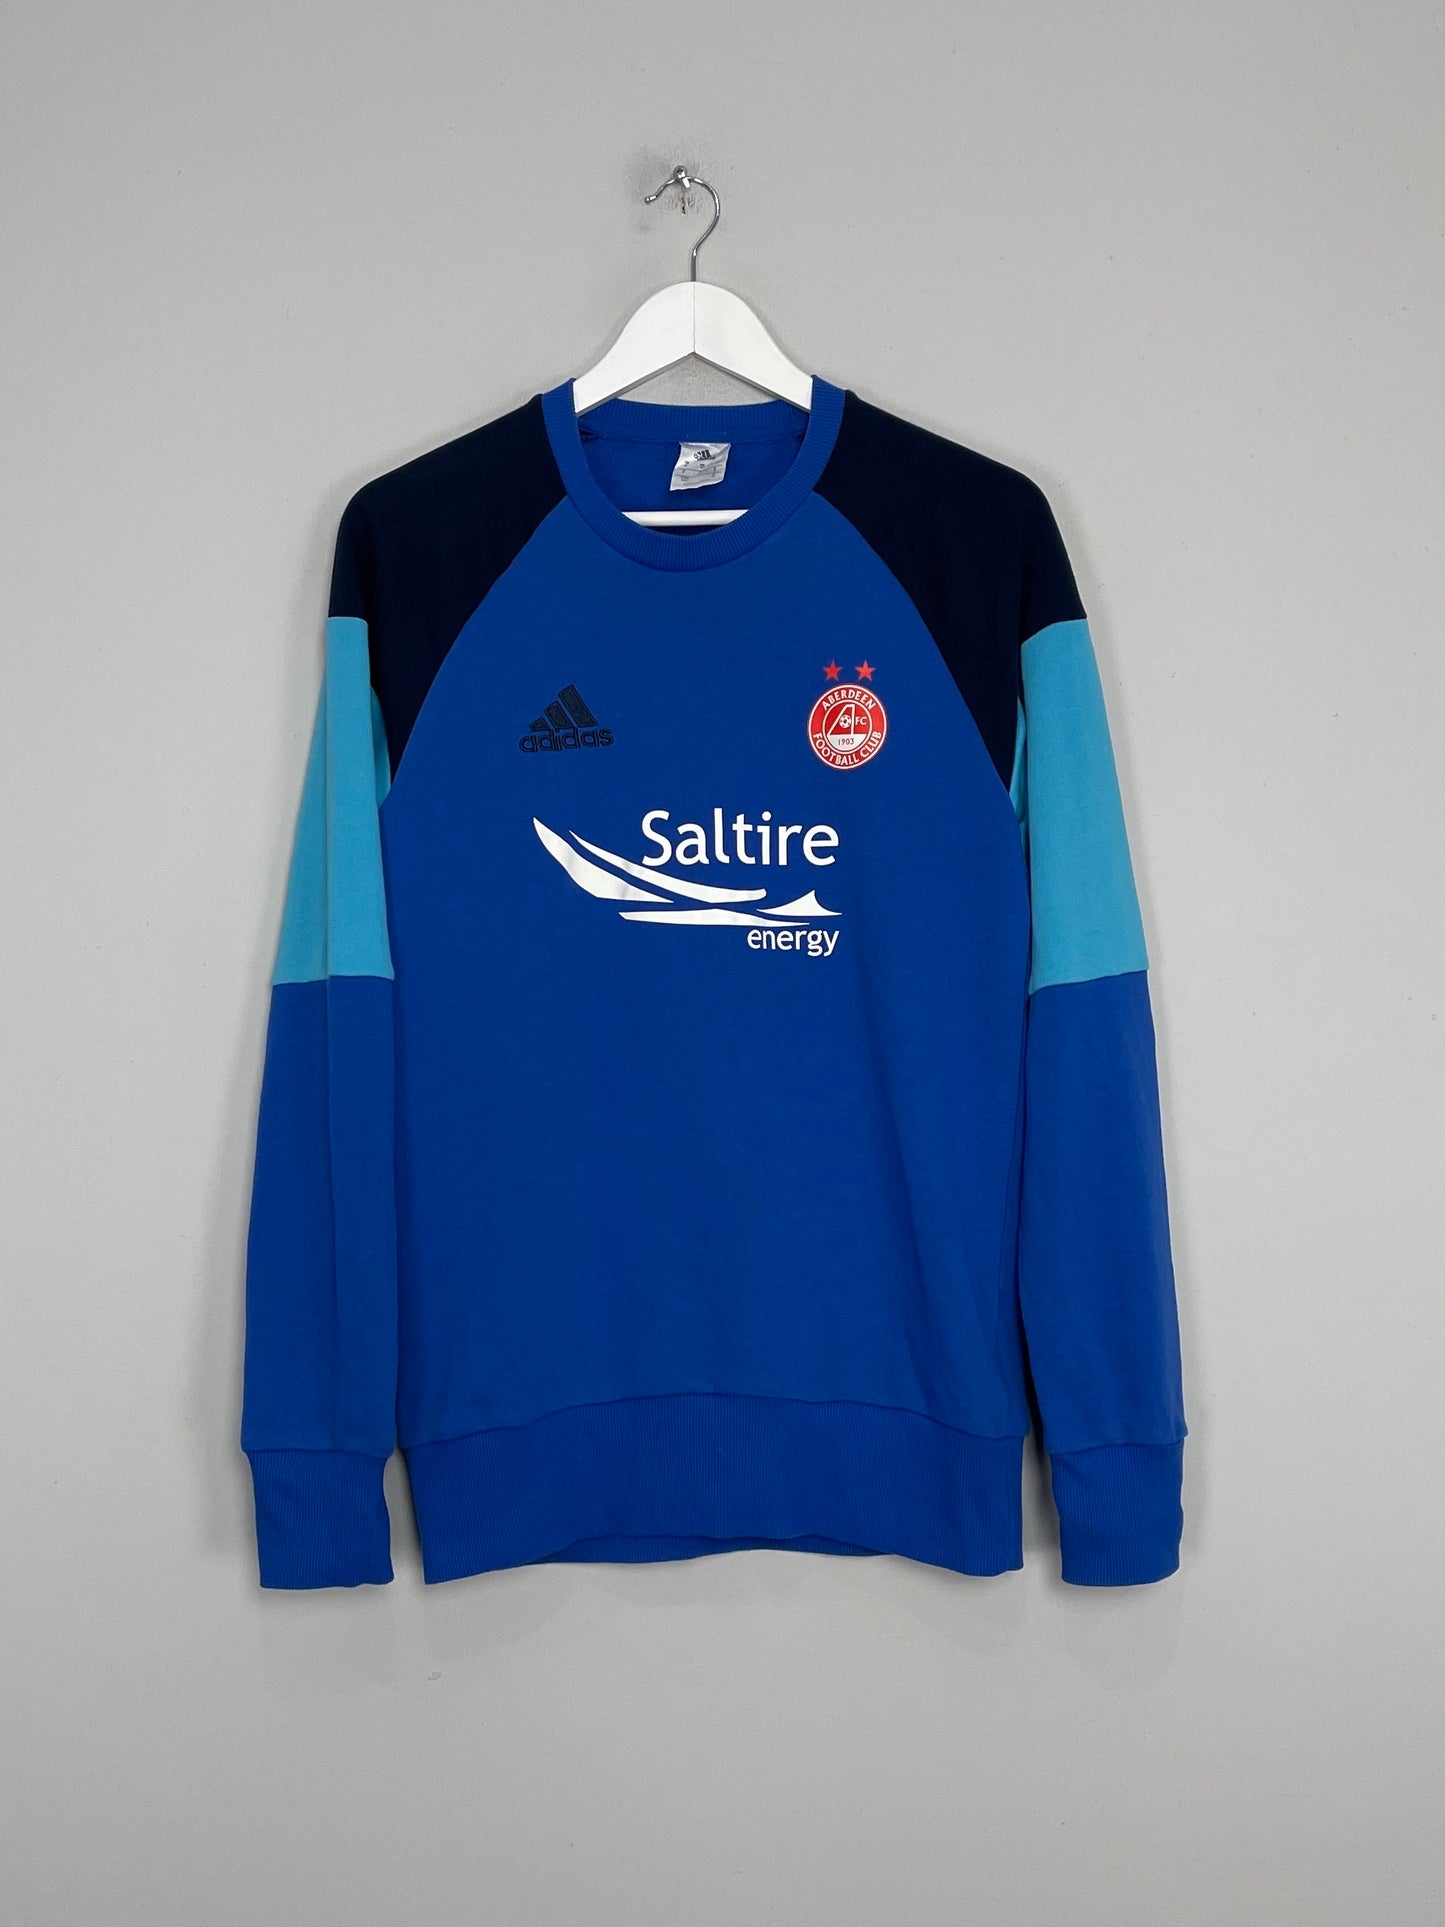 Image of the Aberdeen jumper from the 2015/17 season